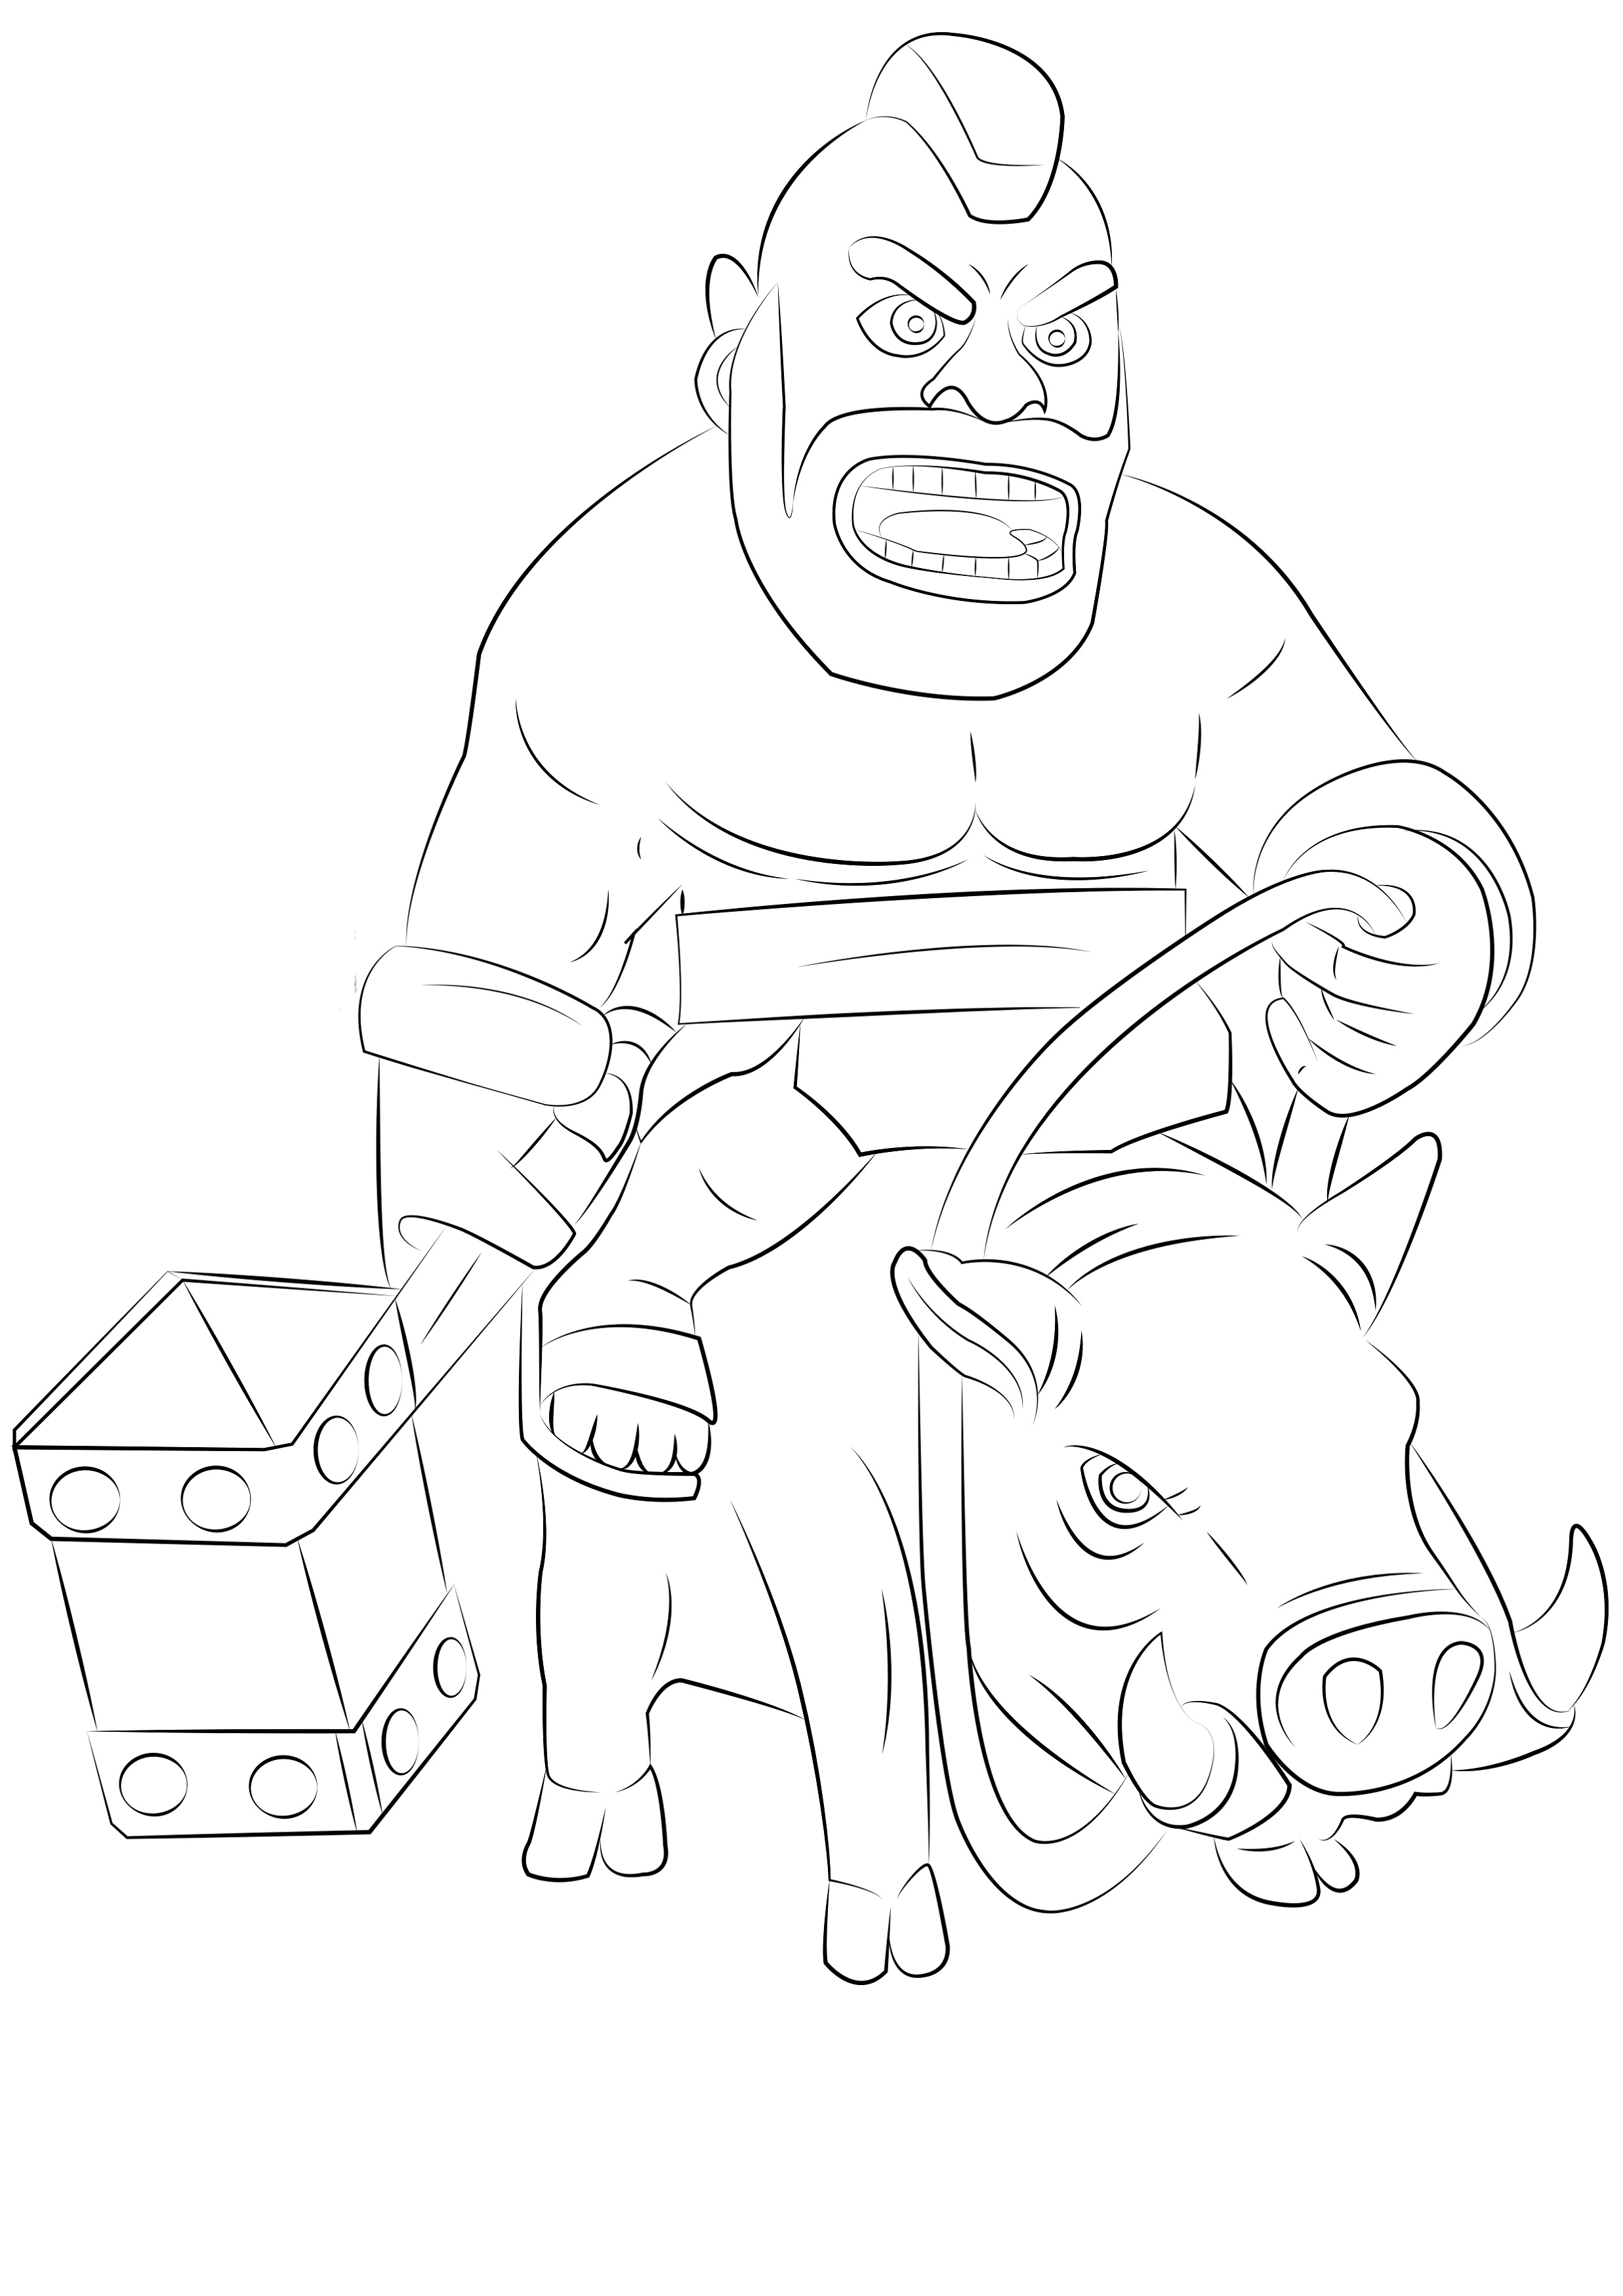 Clash Of Clans Coloring Pages.